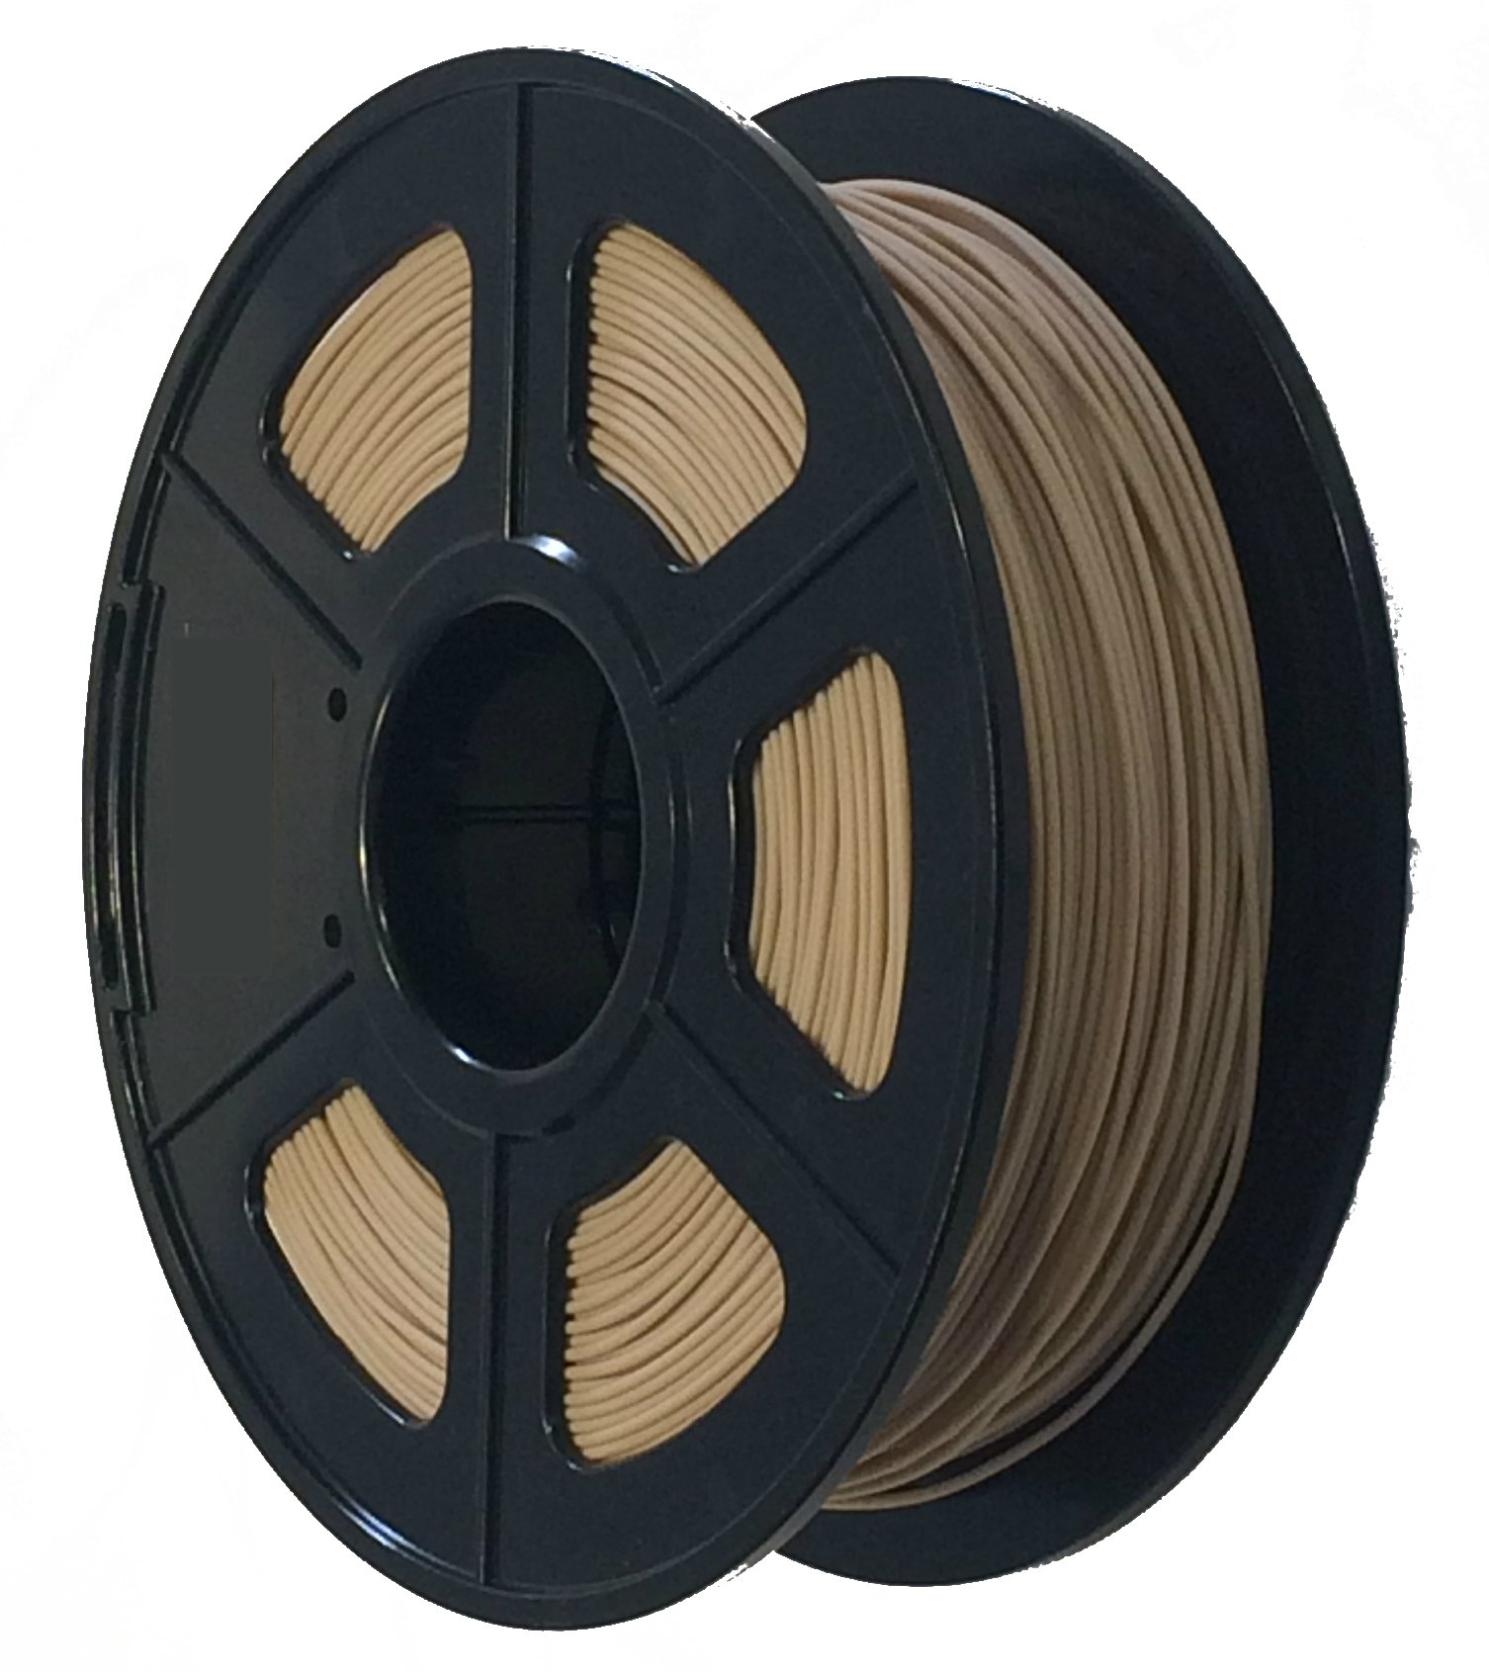 What are the Future Trends and Innovations in Wood Filament Technology?